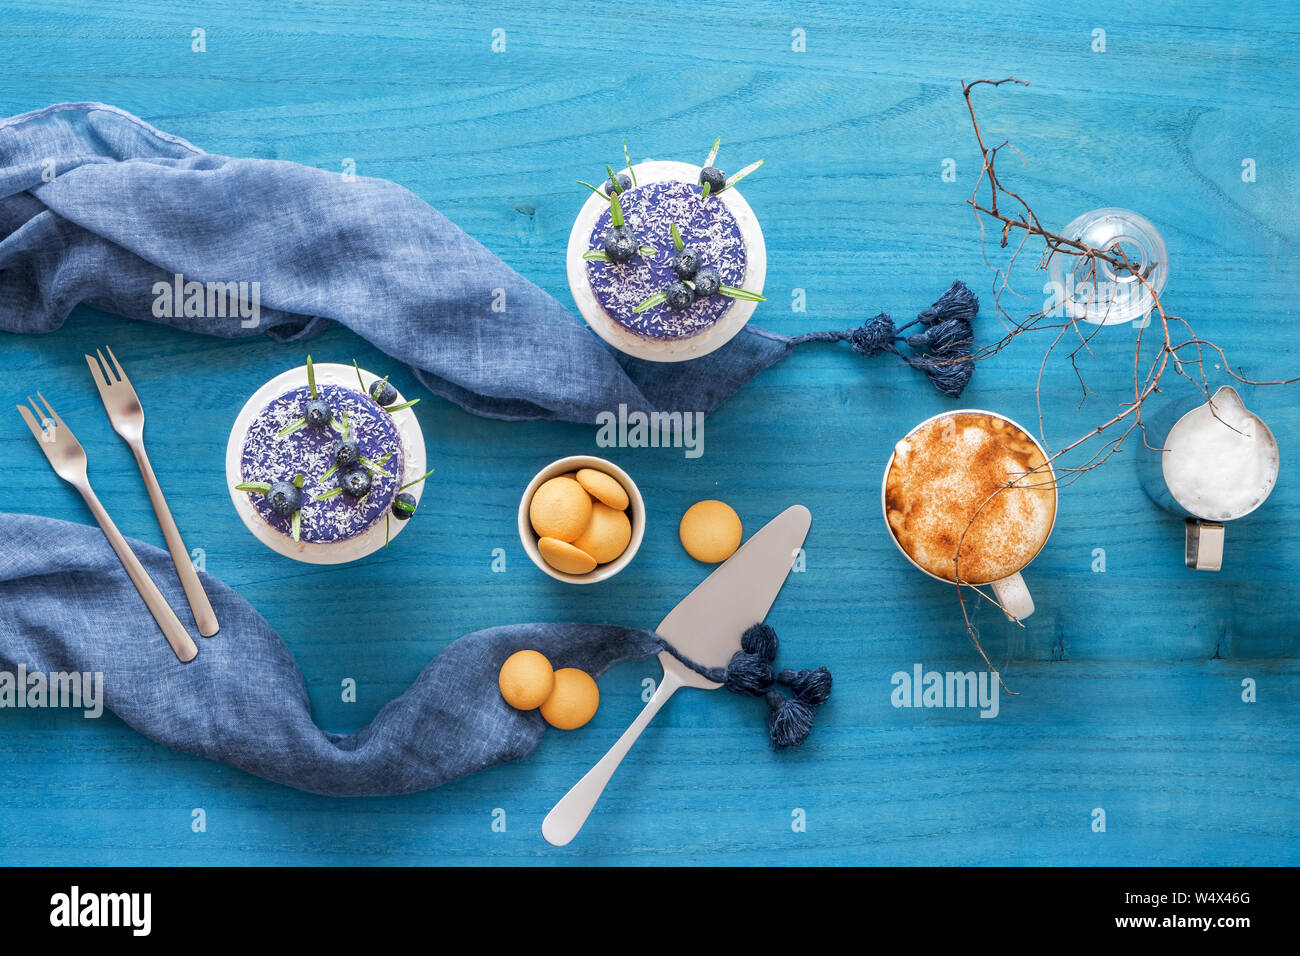 Two round no bake blueberry mini cheesecakes enveloped in coconut and embellished with real blueberries and rosemary leaves. Blue wooden table with co Stock Photo